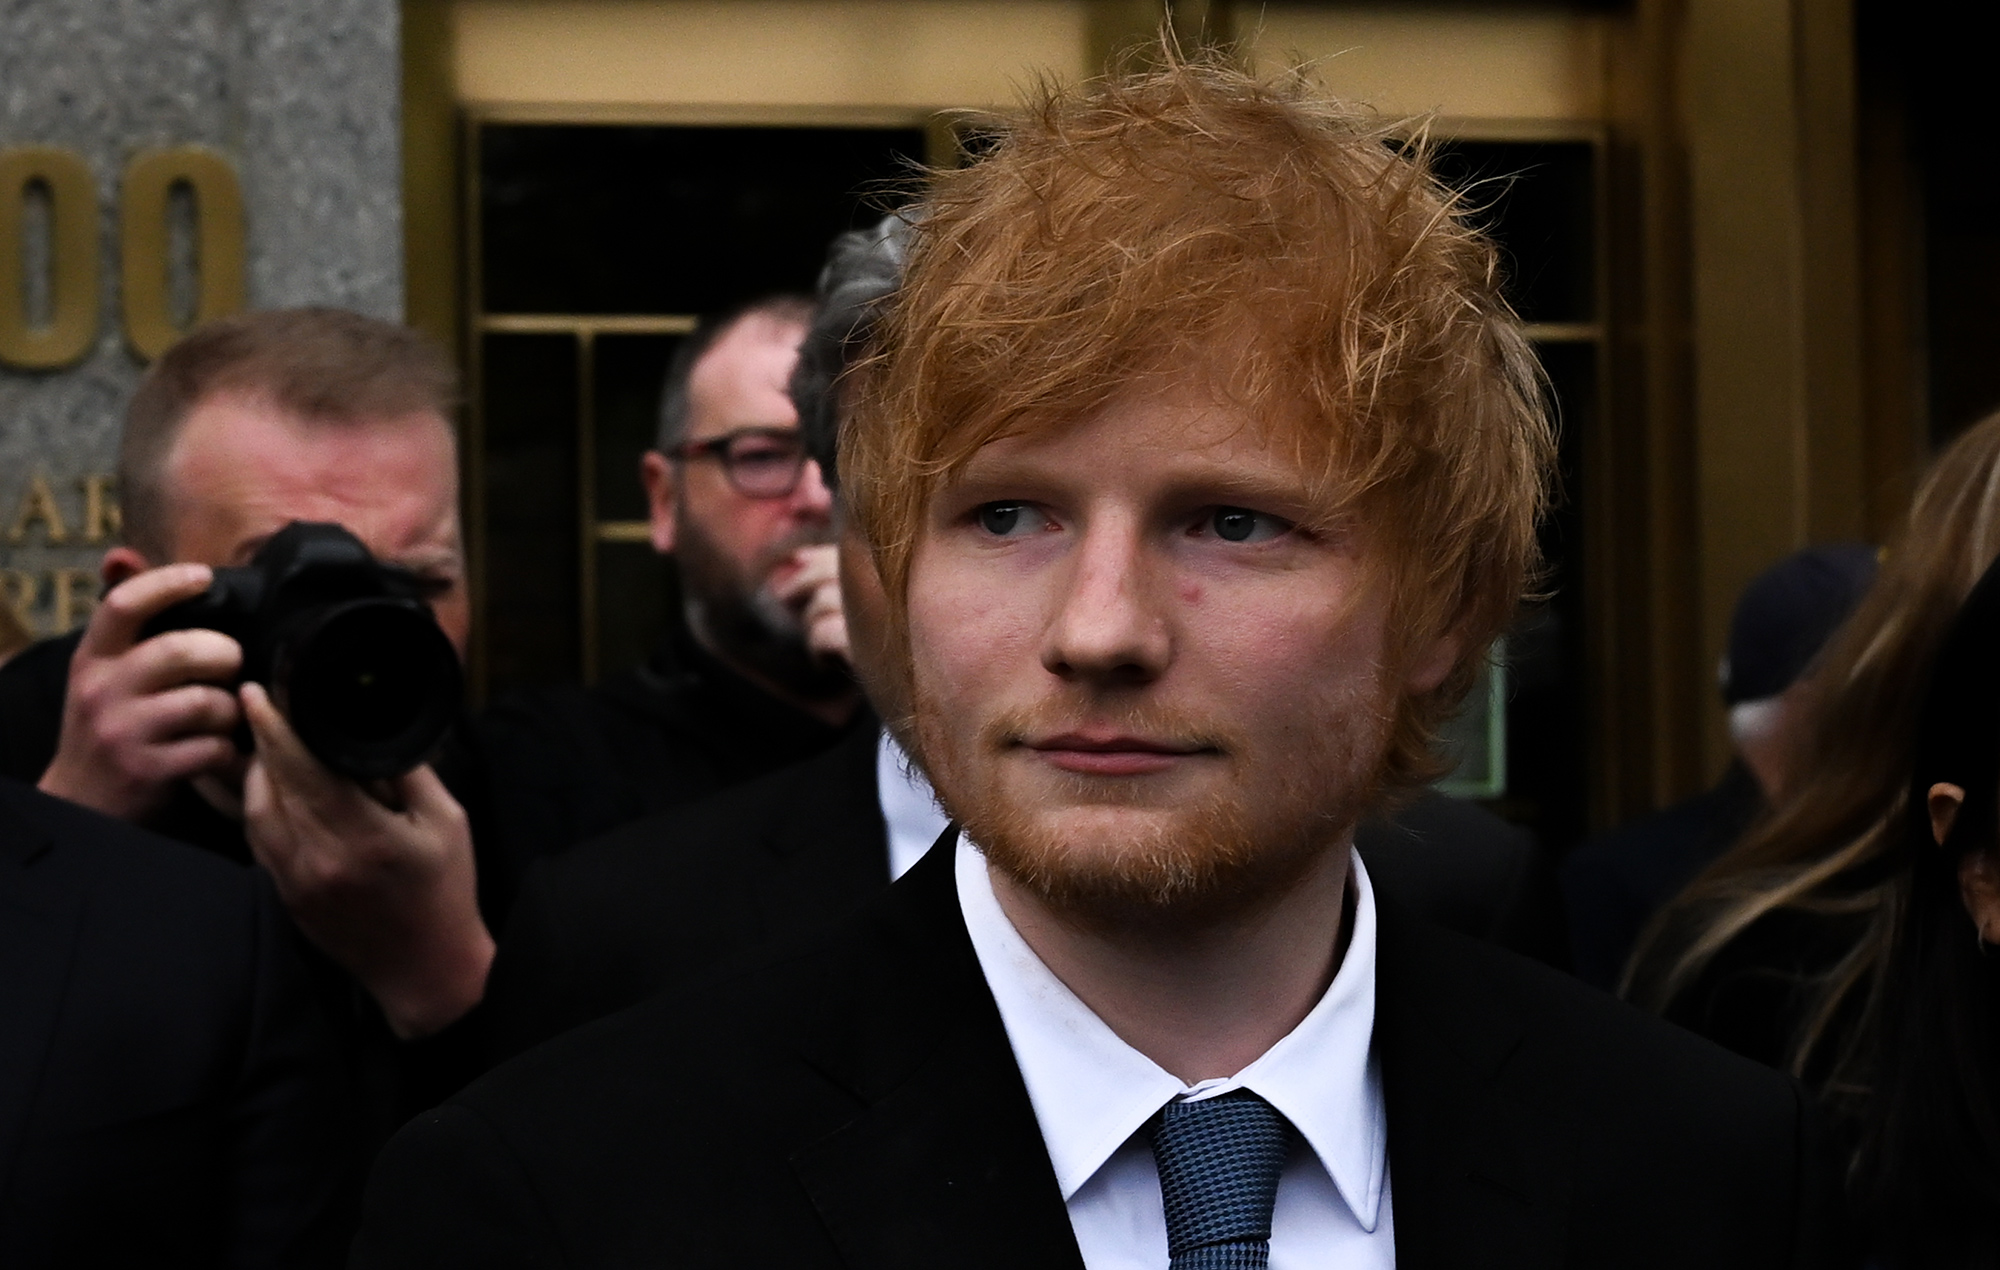 Ed Sheeran says ‘Thinking Out Loud’ copyright battle was “about heart and integrity”